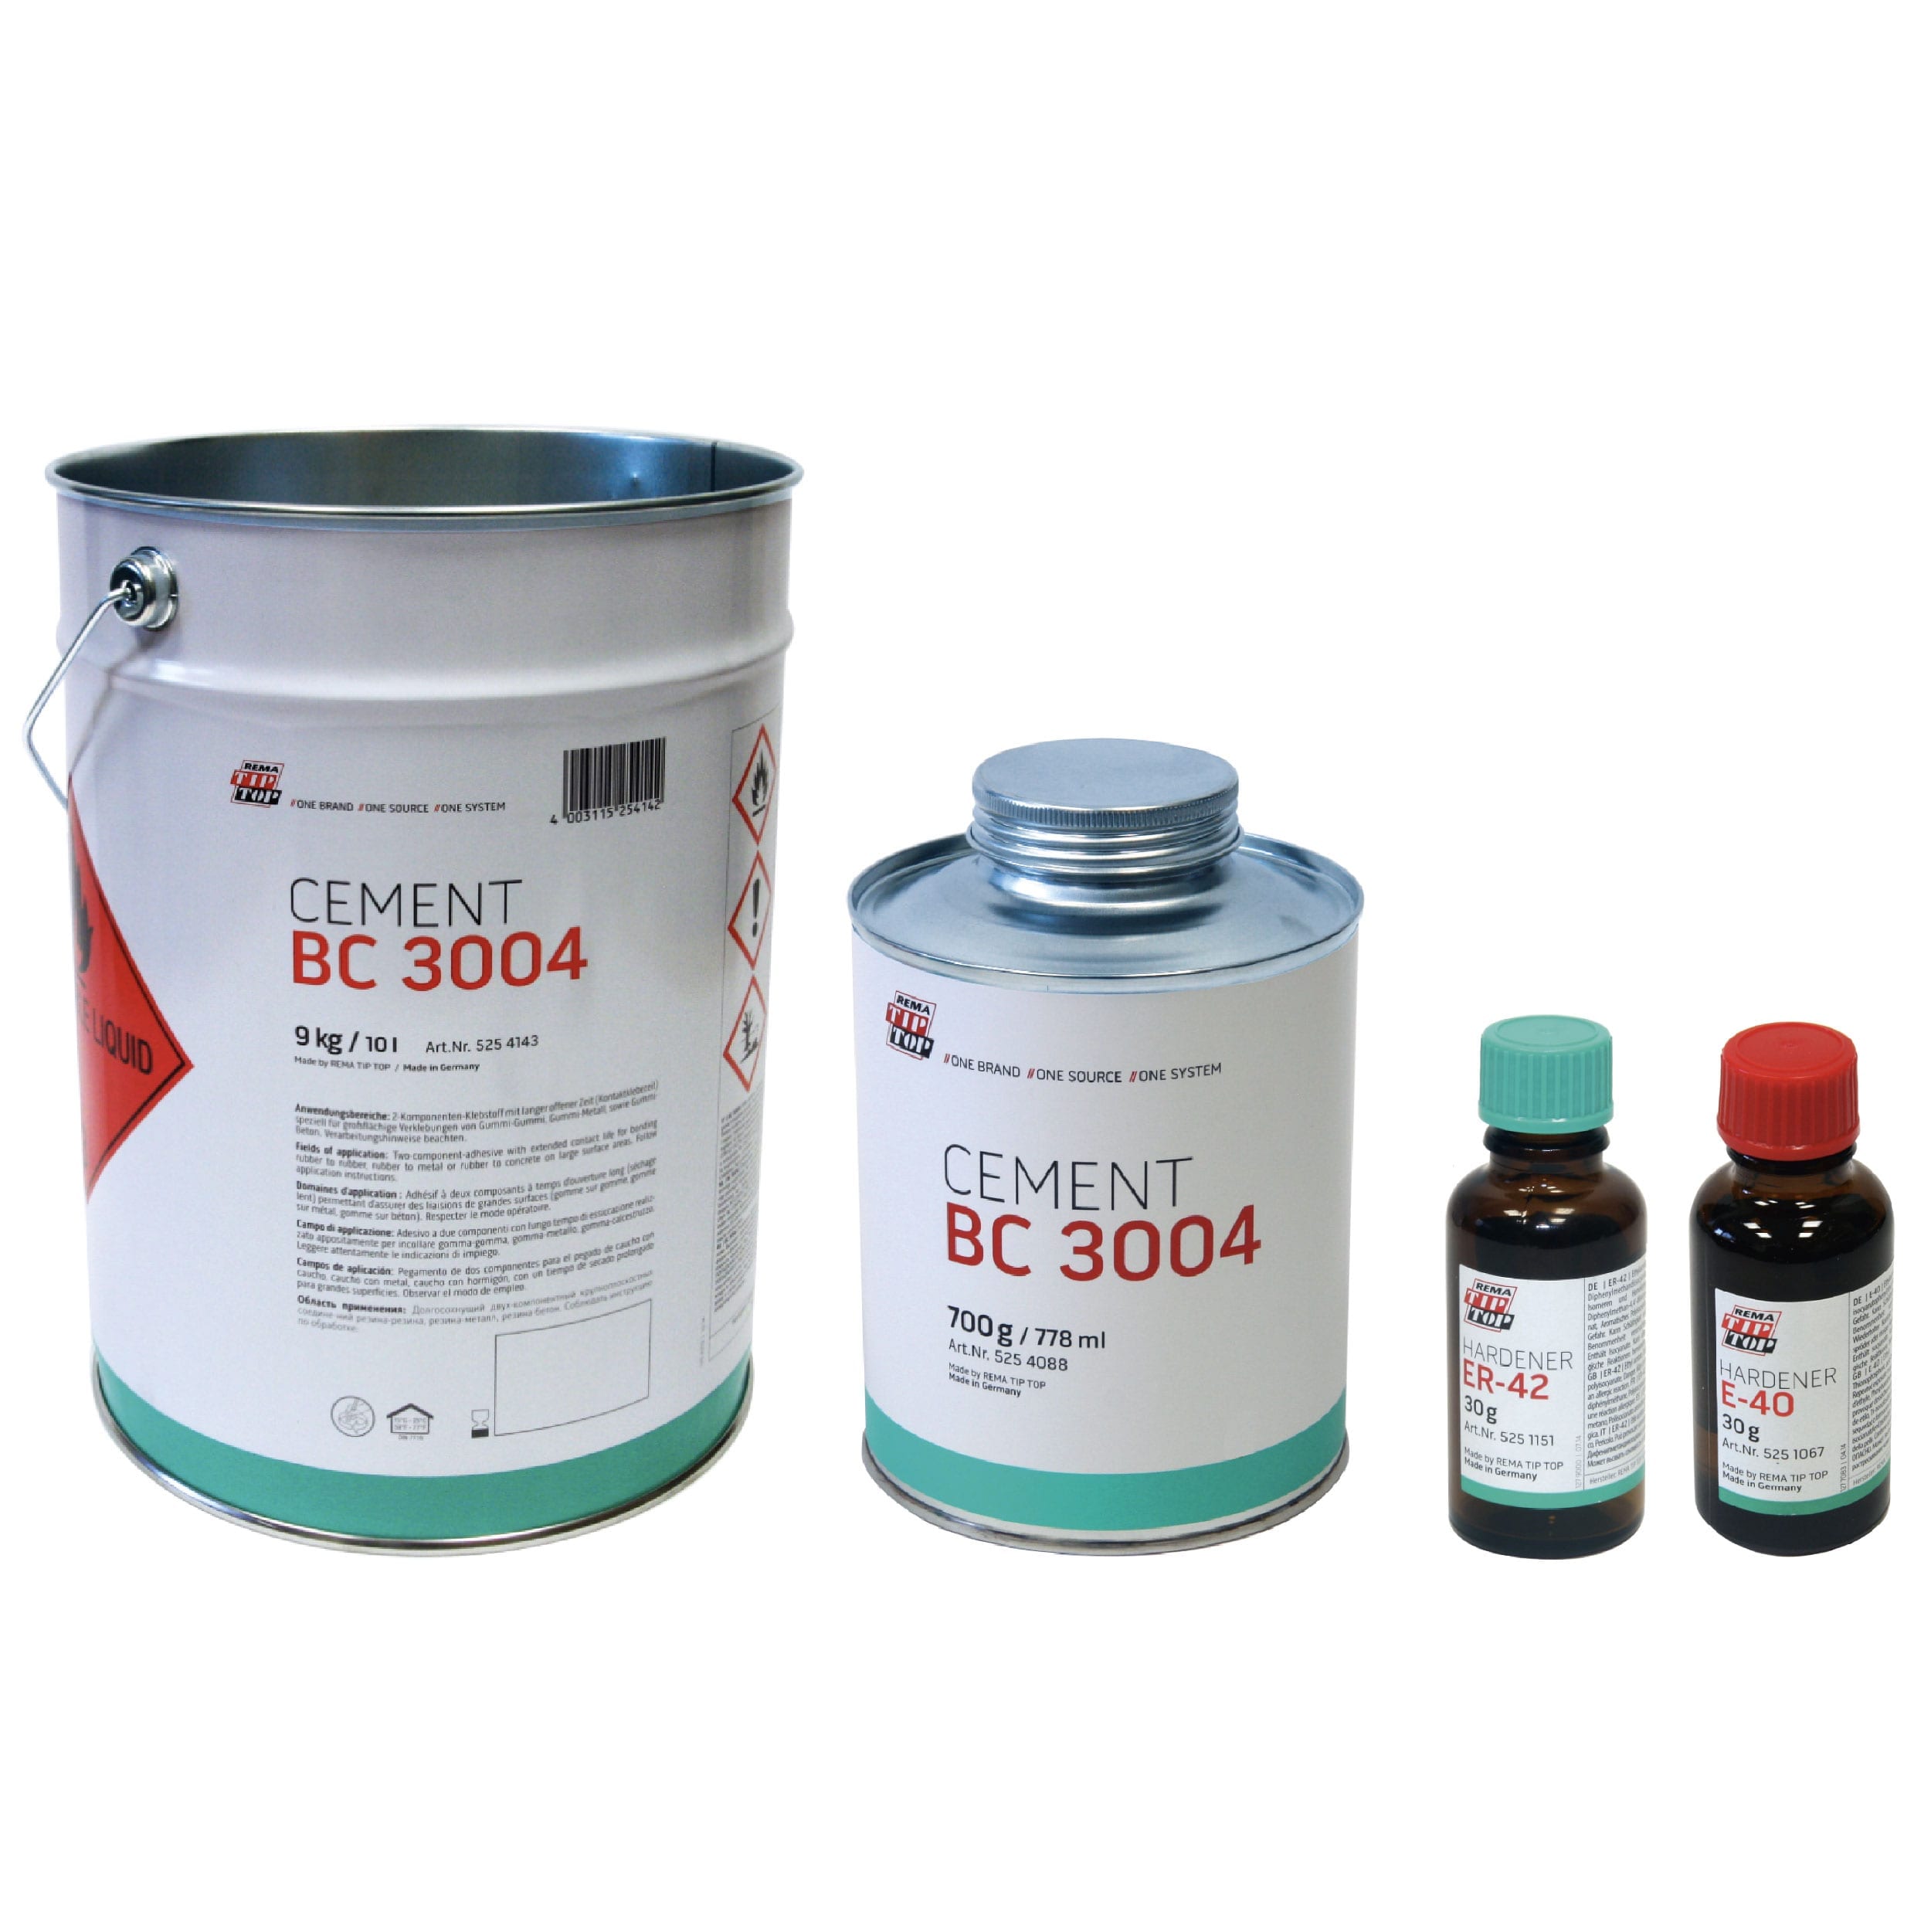 Cement SC Series | REMABOND Adhesive System | REMA TIP TOP